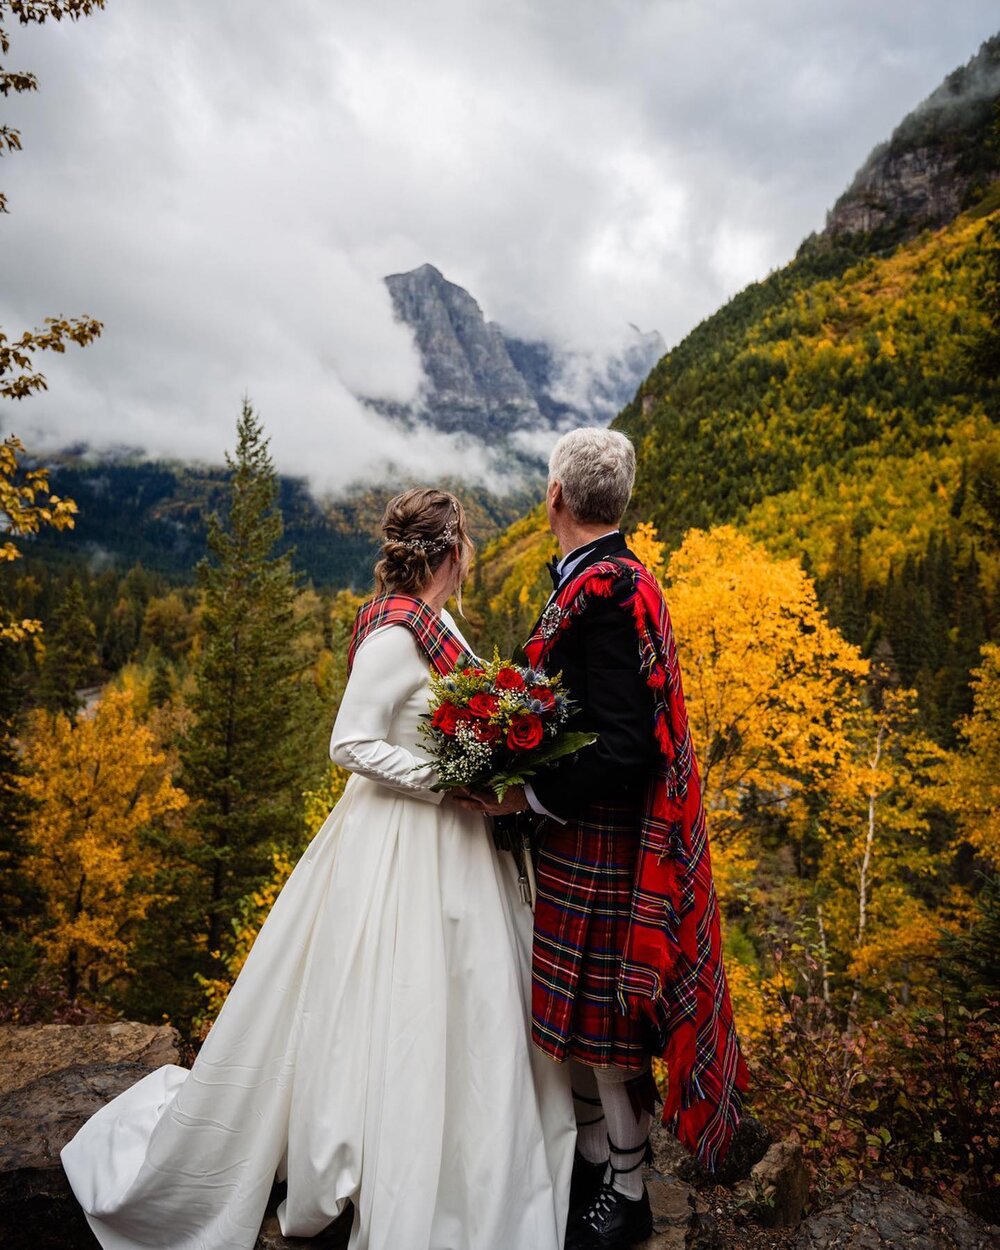 Traditional royal Scottish garb, a hand fasting ceremony, and personalized love songs&hellip; a perfect elopement if you ask us! Fall was in full force on this day colors and wind in all. But the wind couldn&rsquo;t blow this love away. Read about it